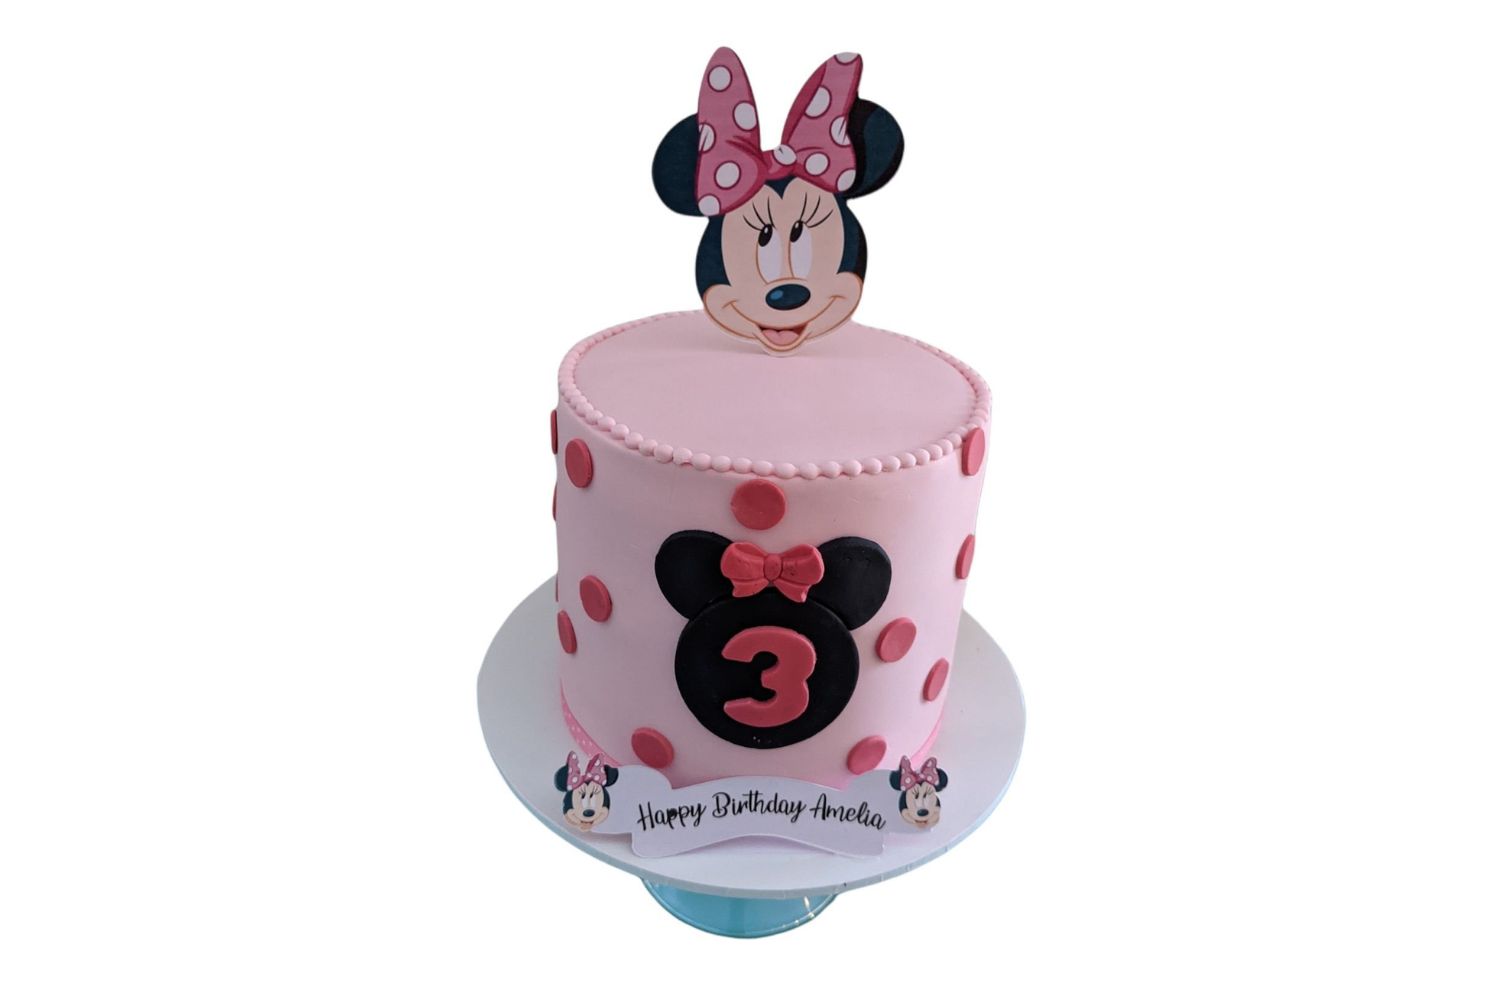 11-intriguing-facts-about-minnie-mouse-cake